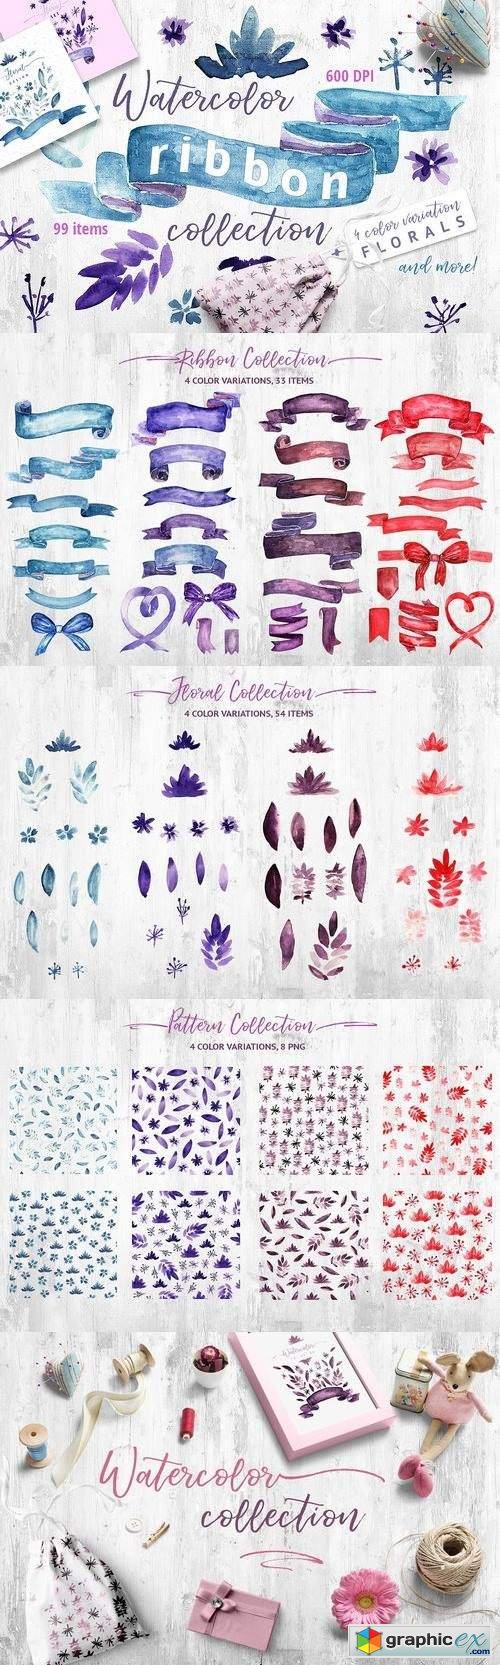 Watercolor Ribbon Collection